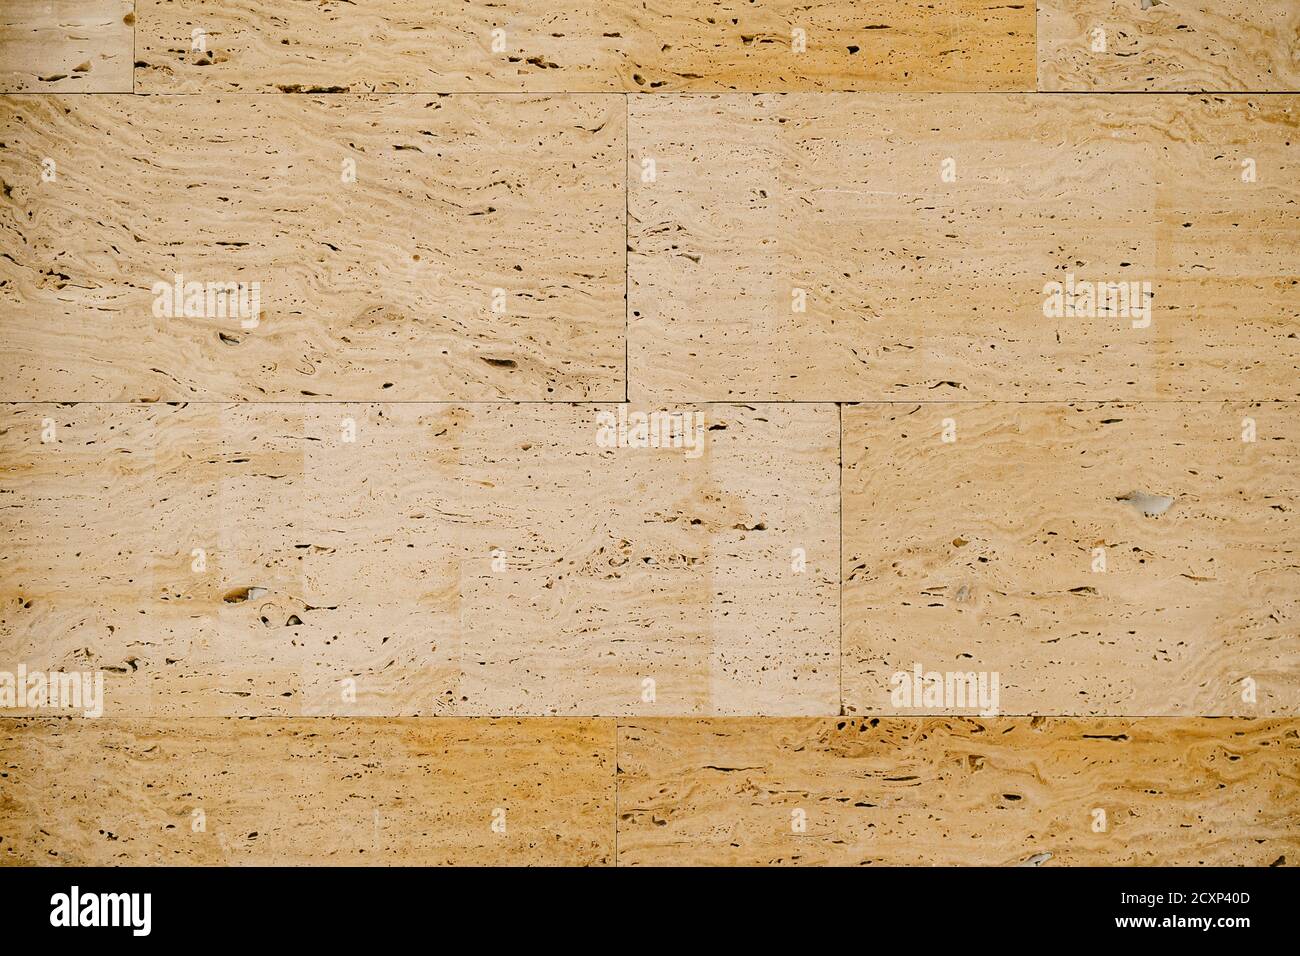 Close-up texture of beige travertine, on wall tiles. Stock Photo